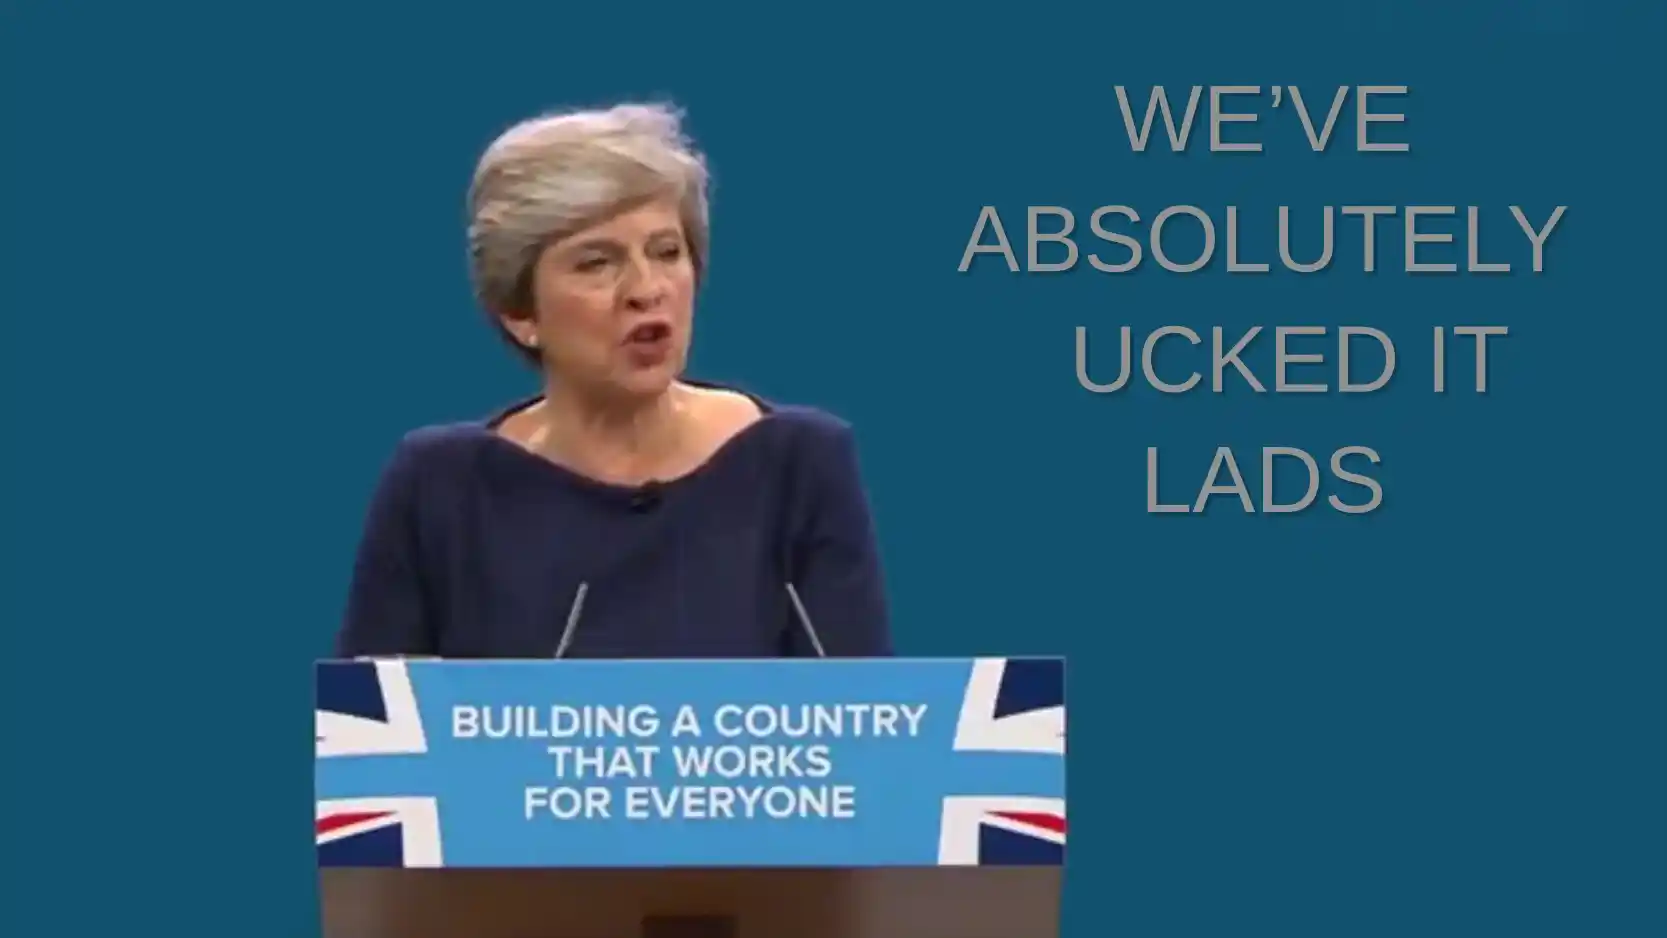 Theresa May in front of spoof conference backdrop saying 'We've absolutely ucked it lads'